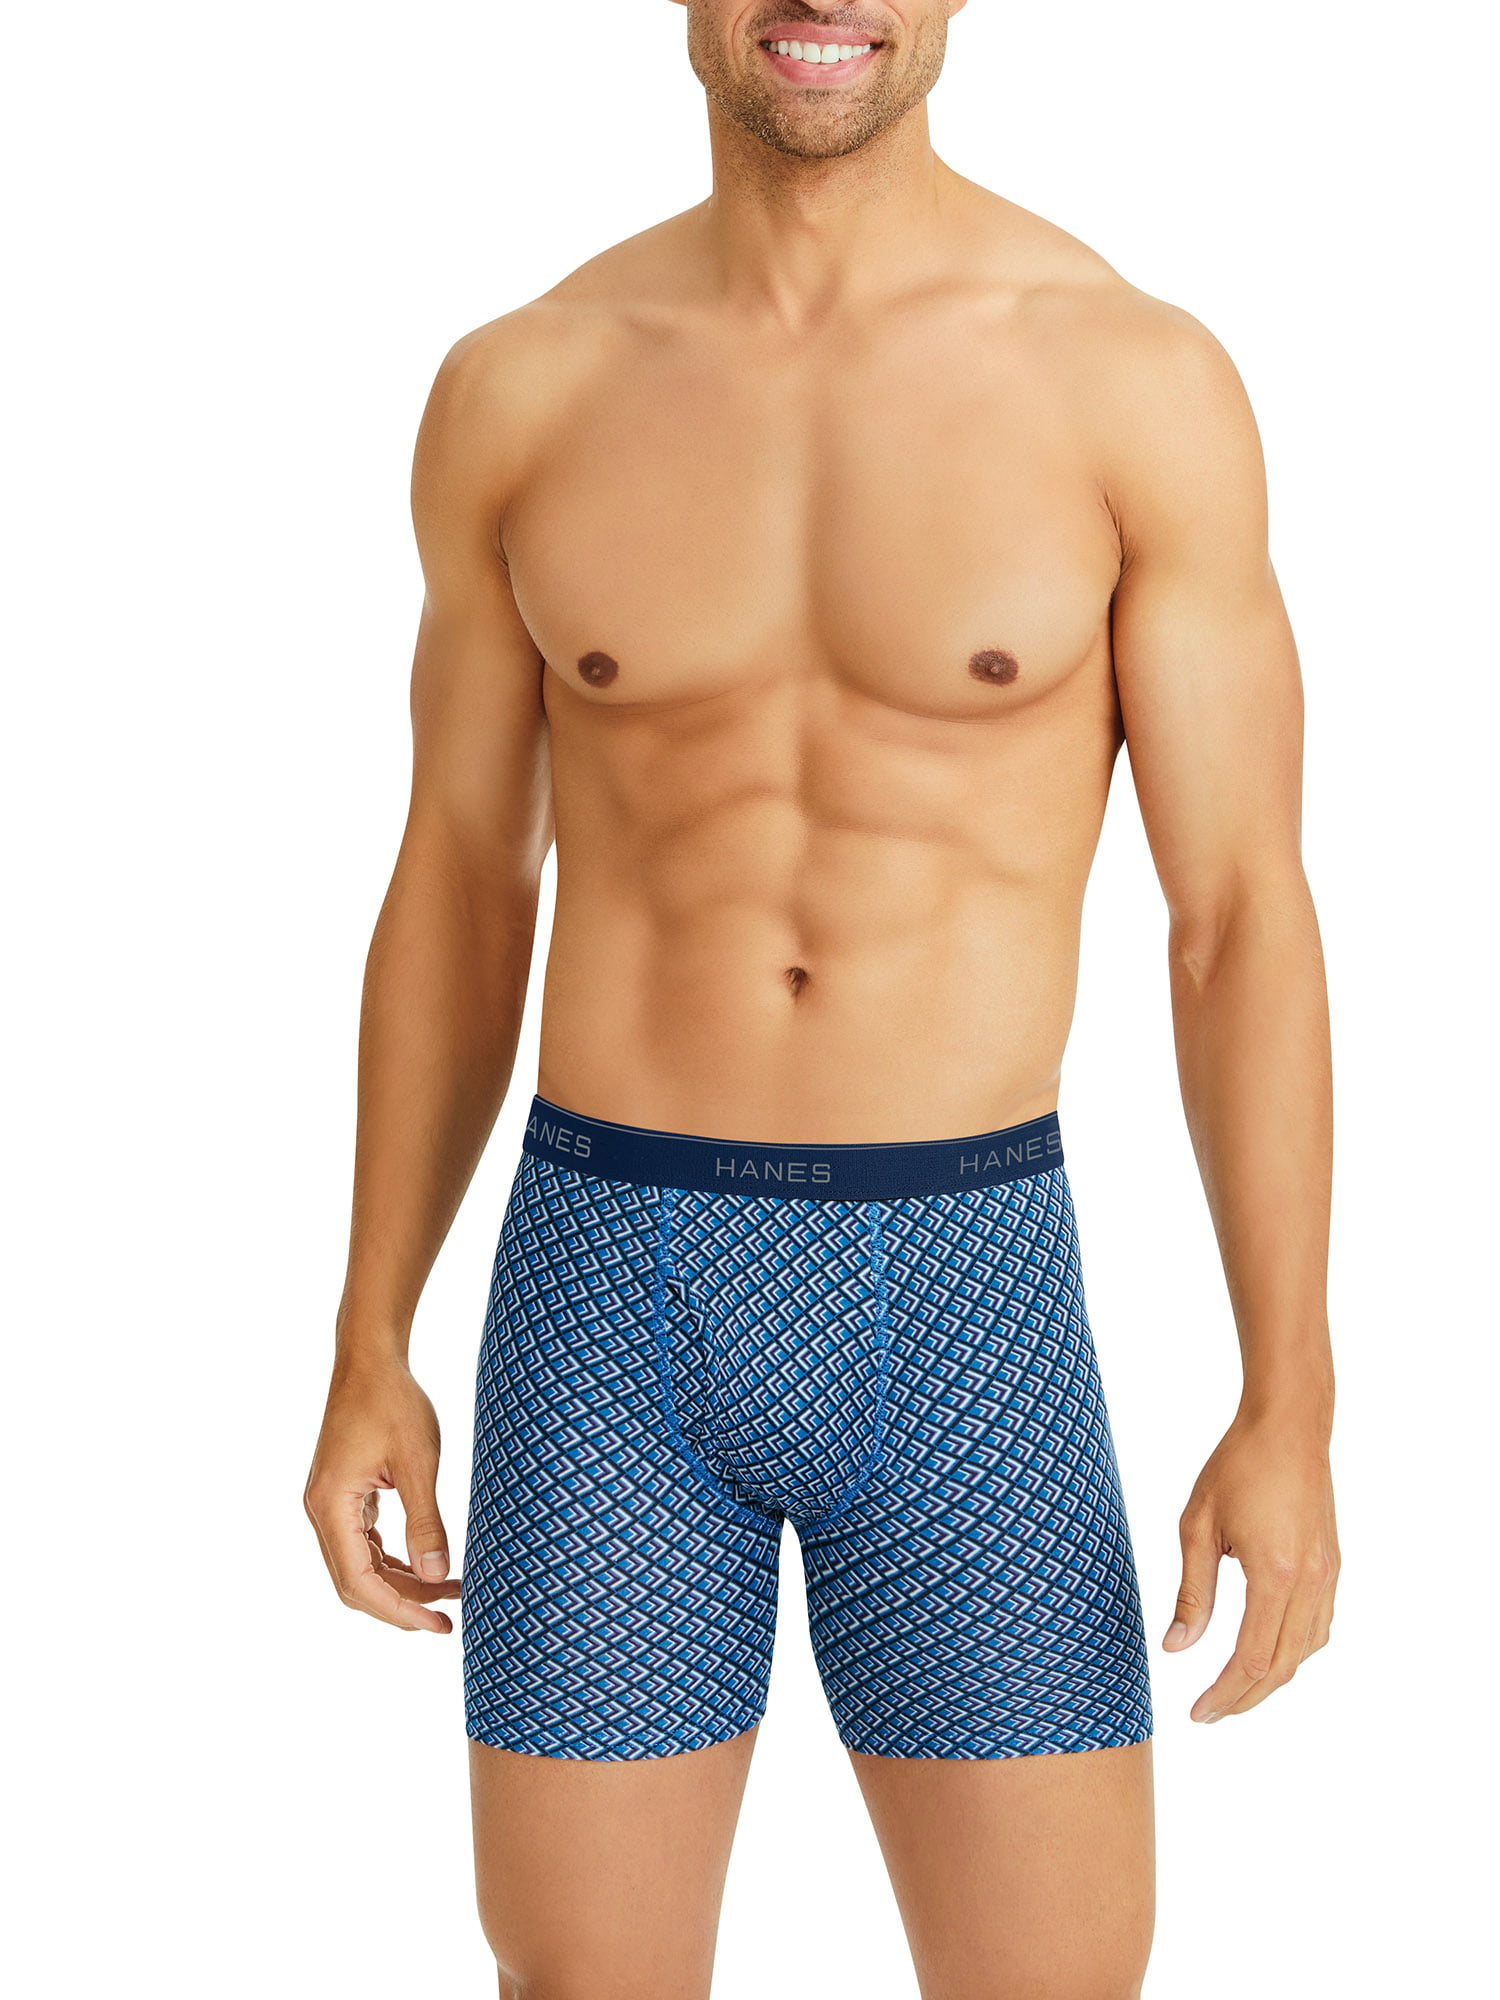 Hanes Men's Stretch Printed Boxer Briefs, 3 pack